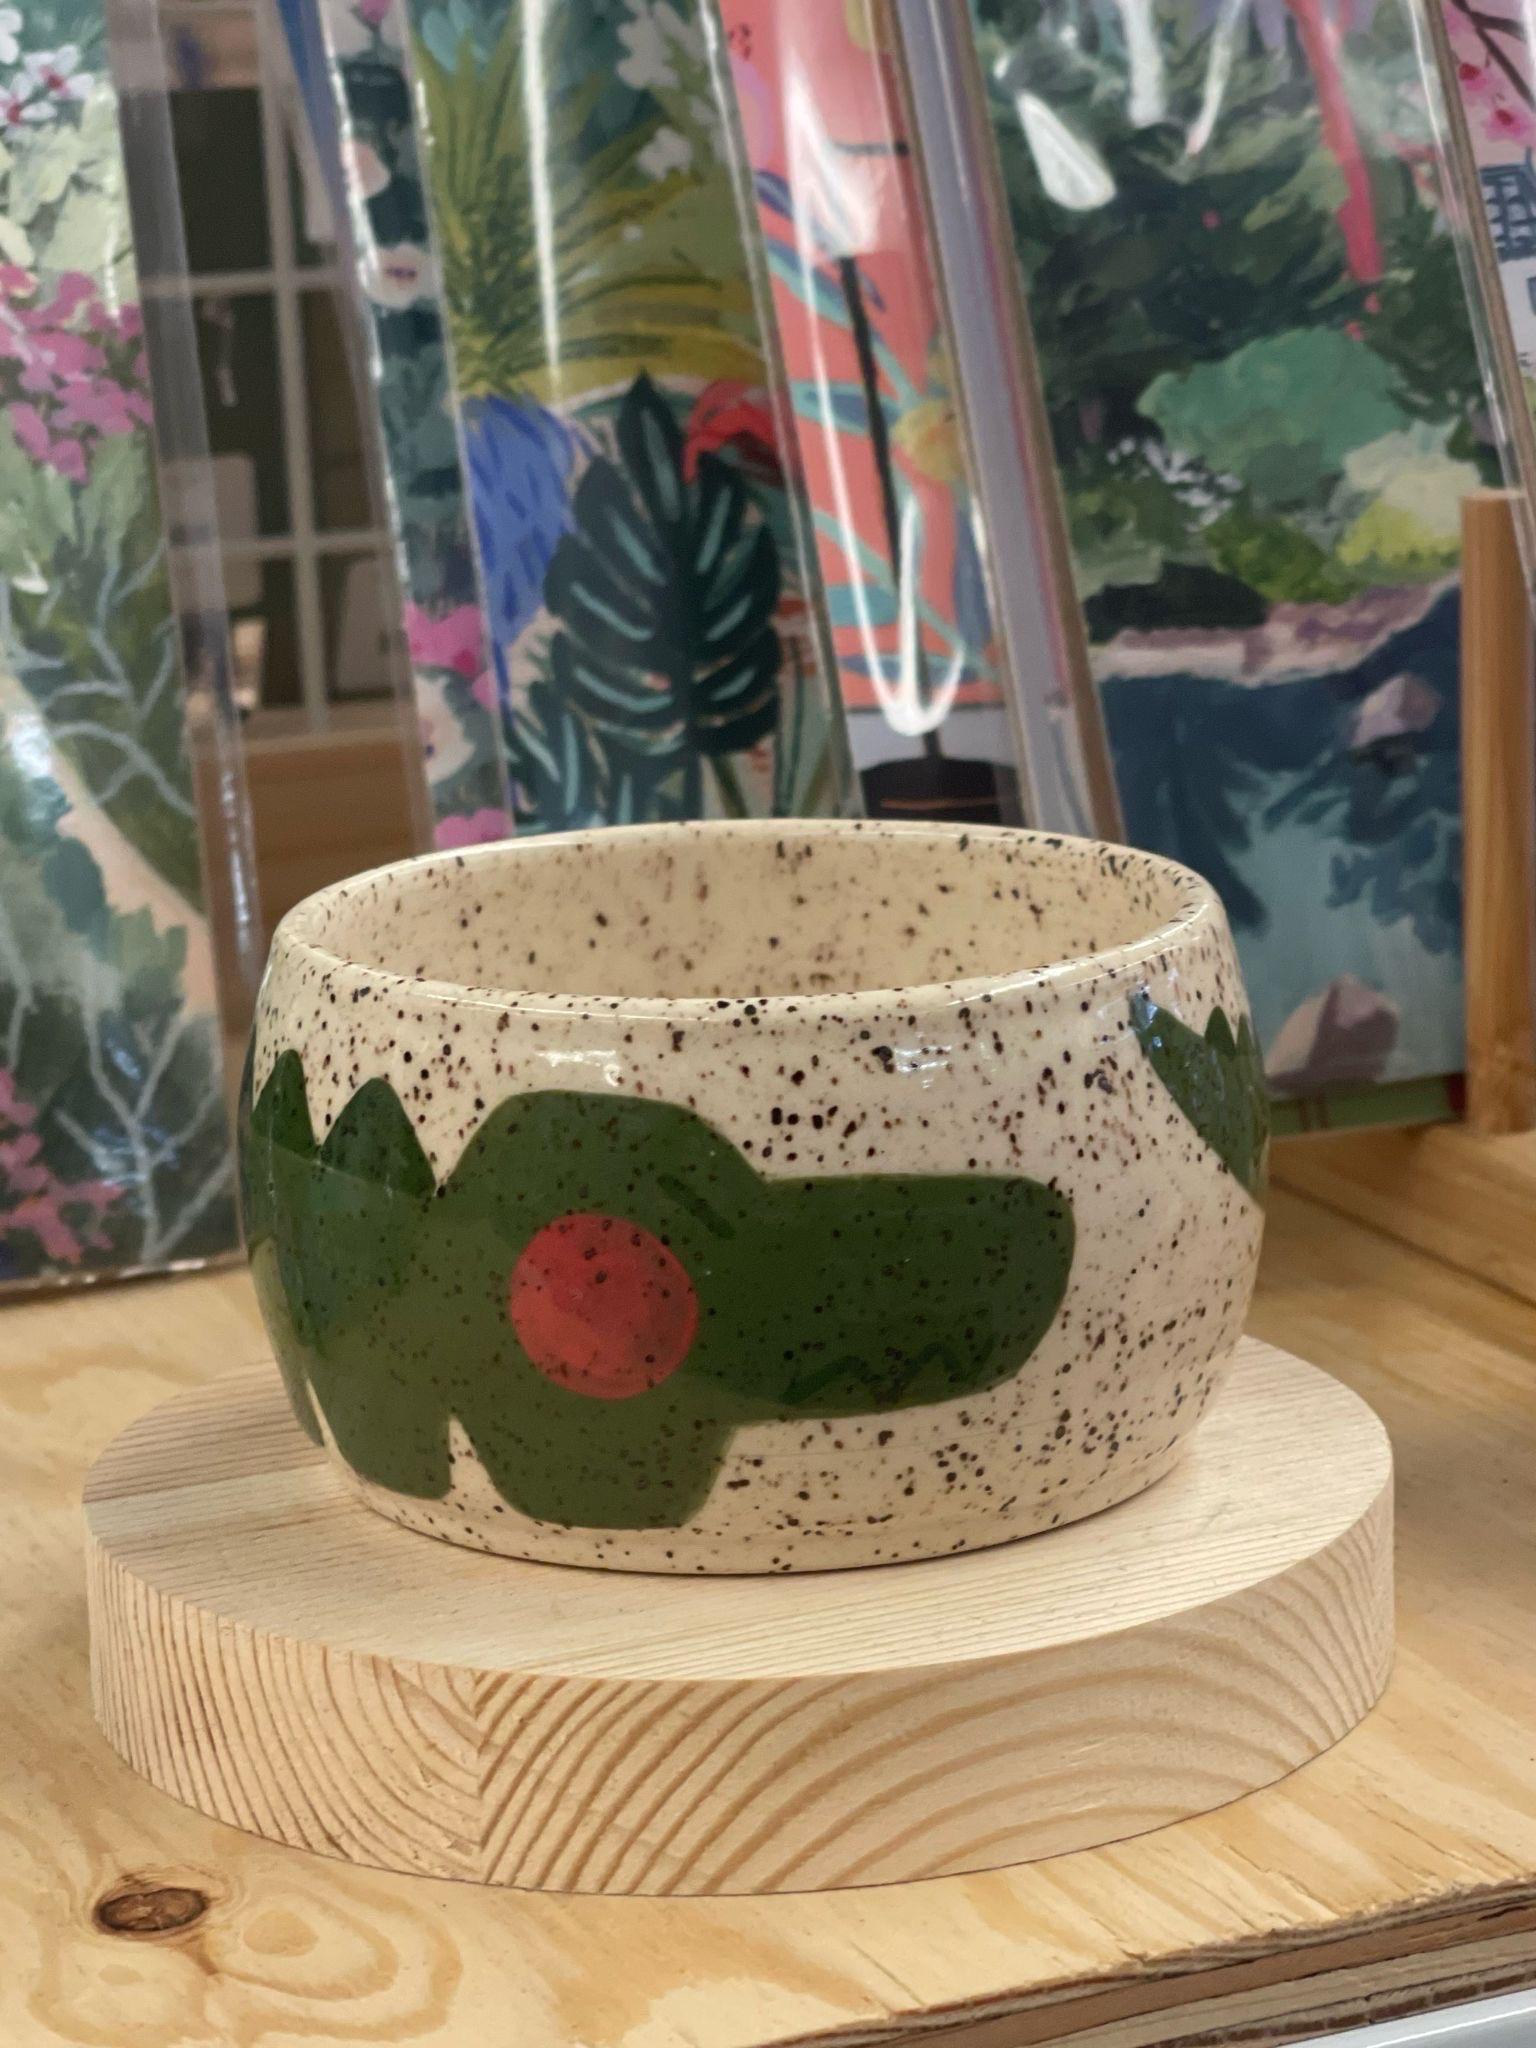 This speckled Bowl has an adorable cartoon alligator wrapped around the sides. Makers mark on the bottom. Little Oakie Studios is a Seattle based company specializing in Kawaii inspired Design. Every piece is Handmade, with slight variations natural